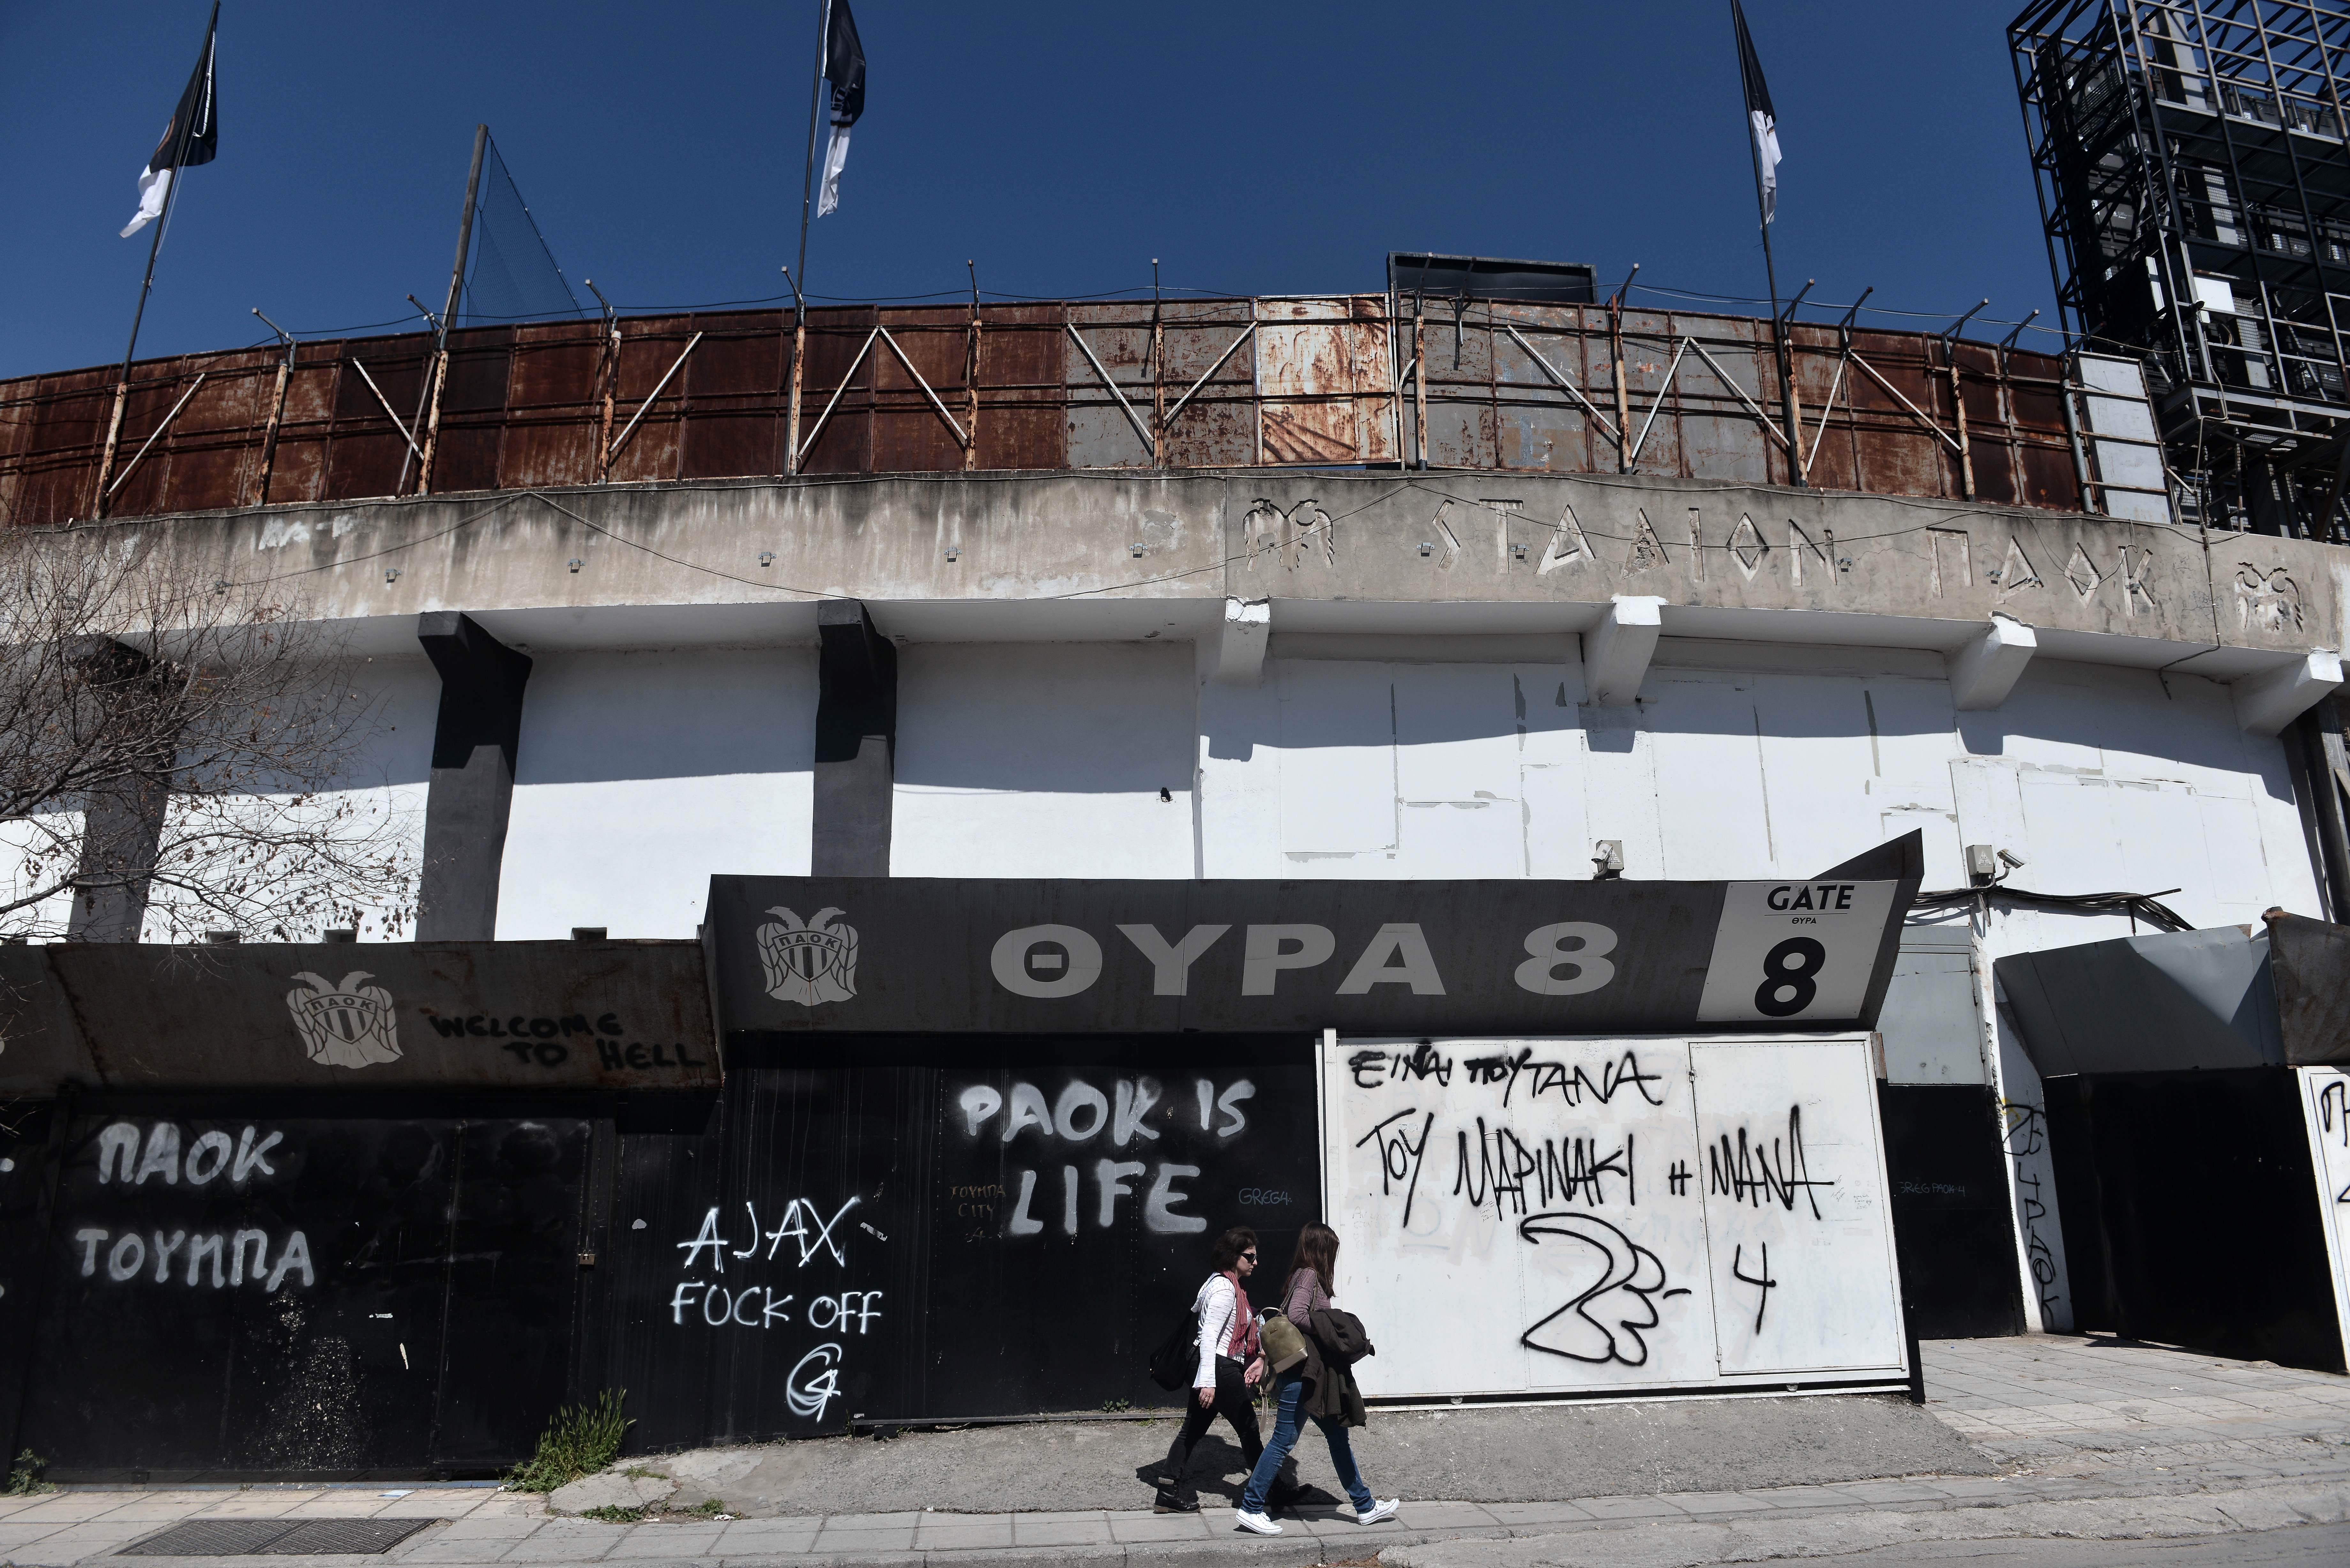 TOPSHOT - People walking next to Toumba stadium, home of PAOK FC, in Thessaloniki on March 29, 2018.
The owner of Greek club PAOK has been banned for three years after storming onto the pitch with a holstered gun on his belt,league organisers said.
PAOK were also docked three points and fined for Ivan Savvidis'actions meaning they drop to third place in a tight championship race. / AFP PHOTO / SAKIS MITROLIDIS        (Photo credit should read SAKIS MITROLIDIS/AFP/Getty Images)